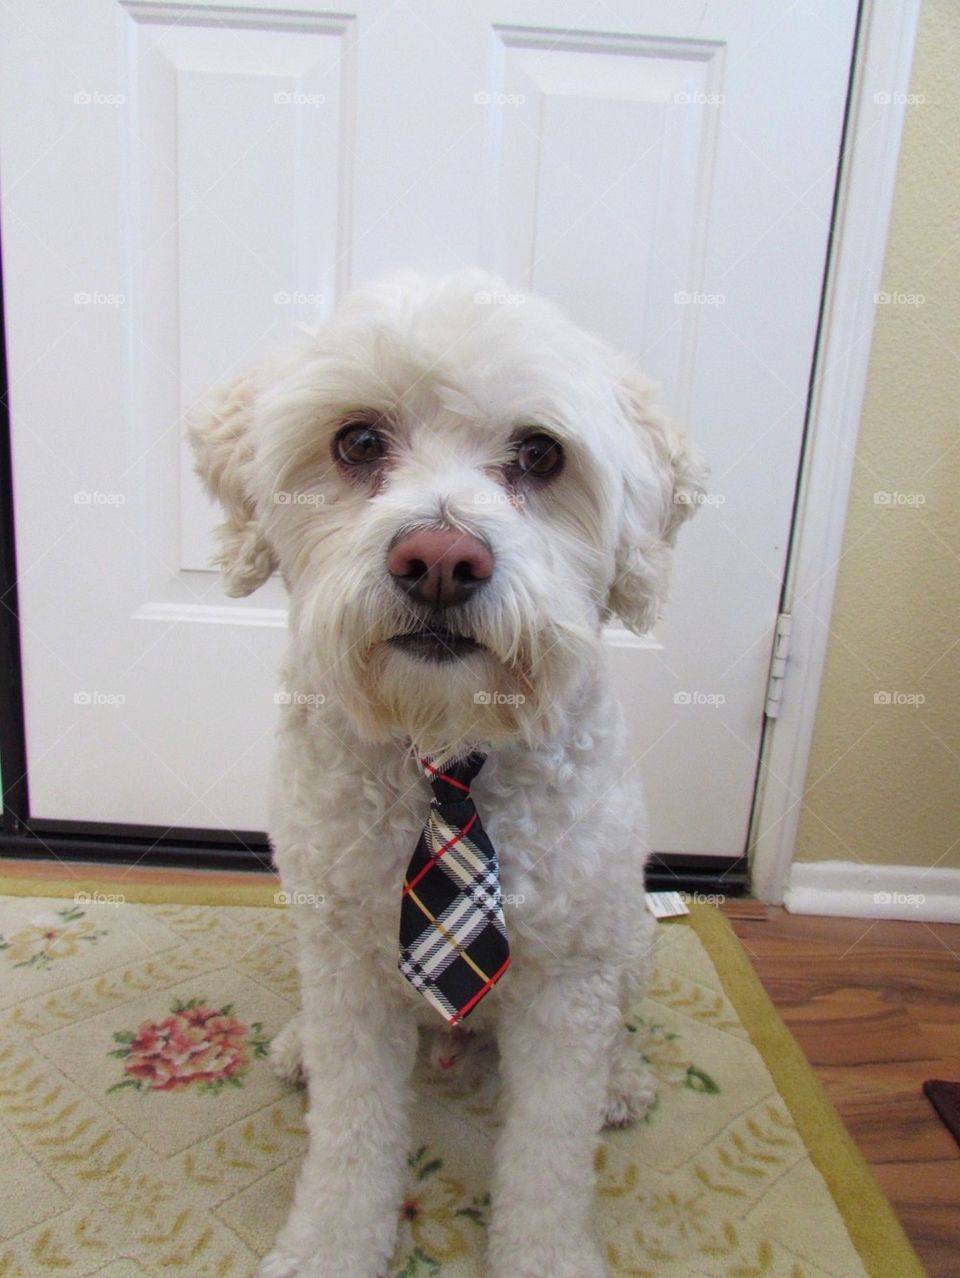 Dog with a Tie